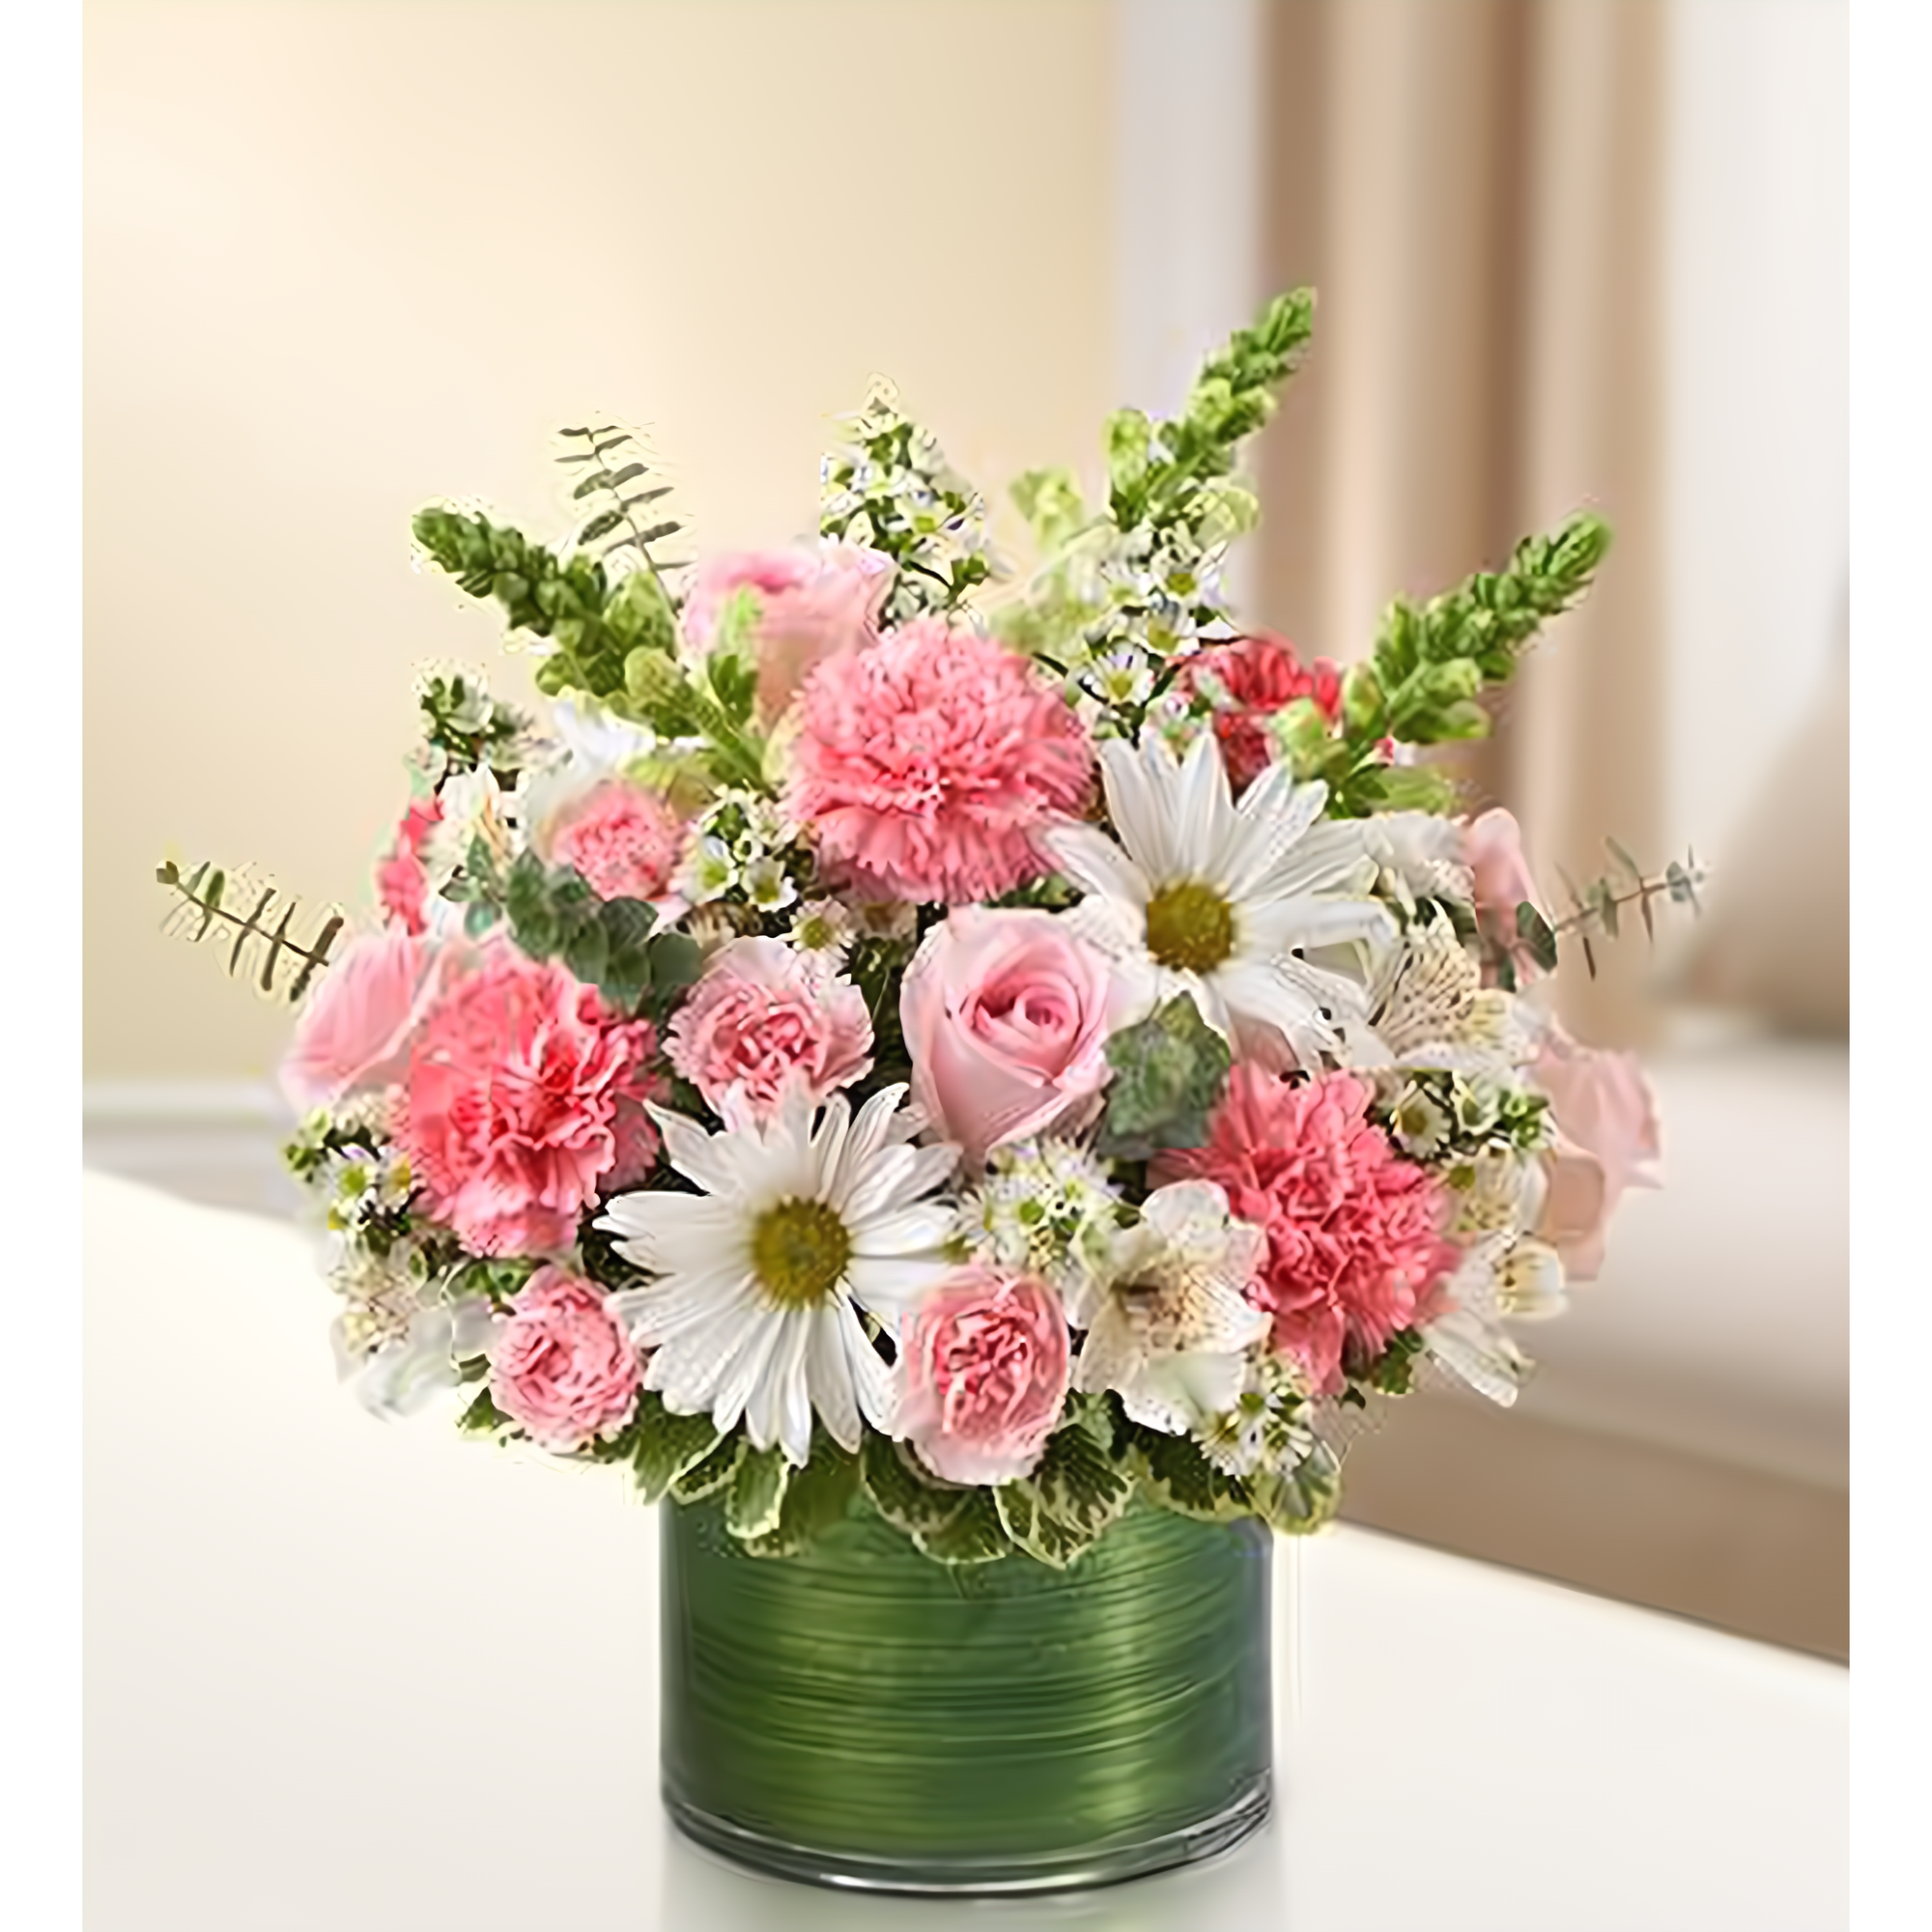 NYC Flower Delivery - Cherished Memories - Pink and White - Funeral > Vase Arrangements